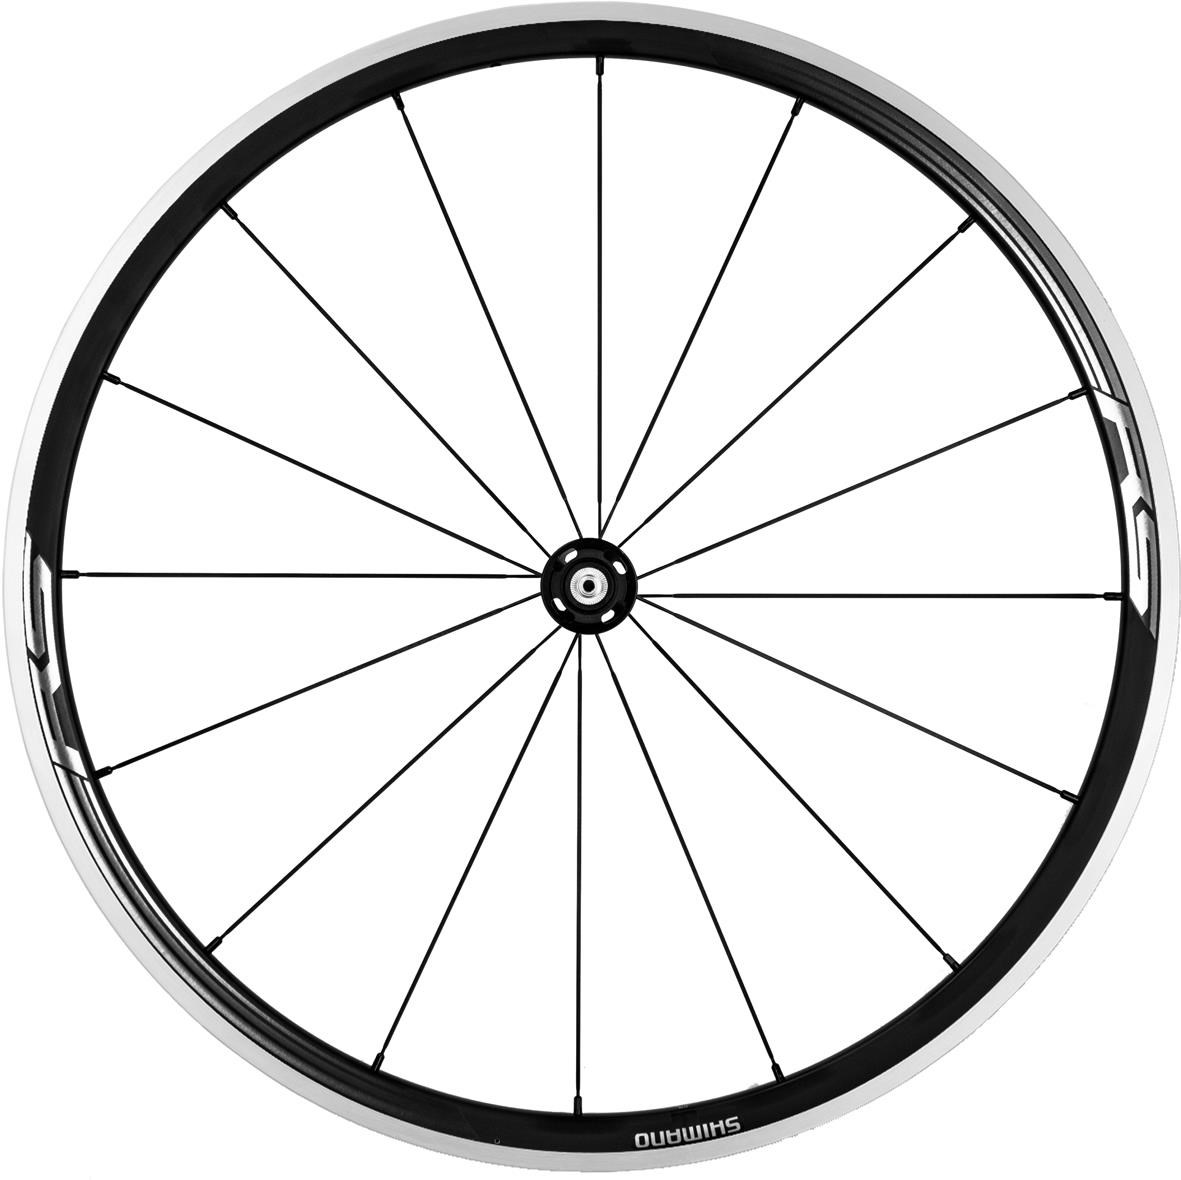 Shimano WH-RS330 Wheel, Clincher 30 mm, Black, Front product image